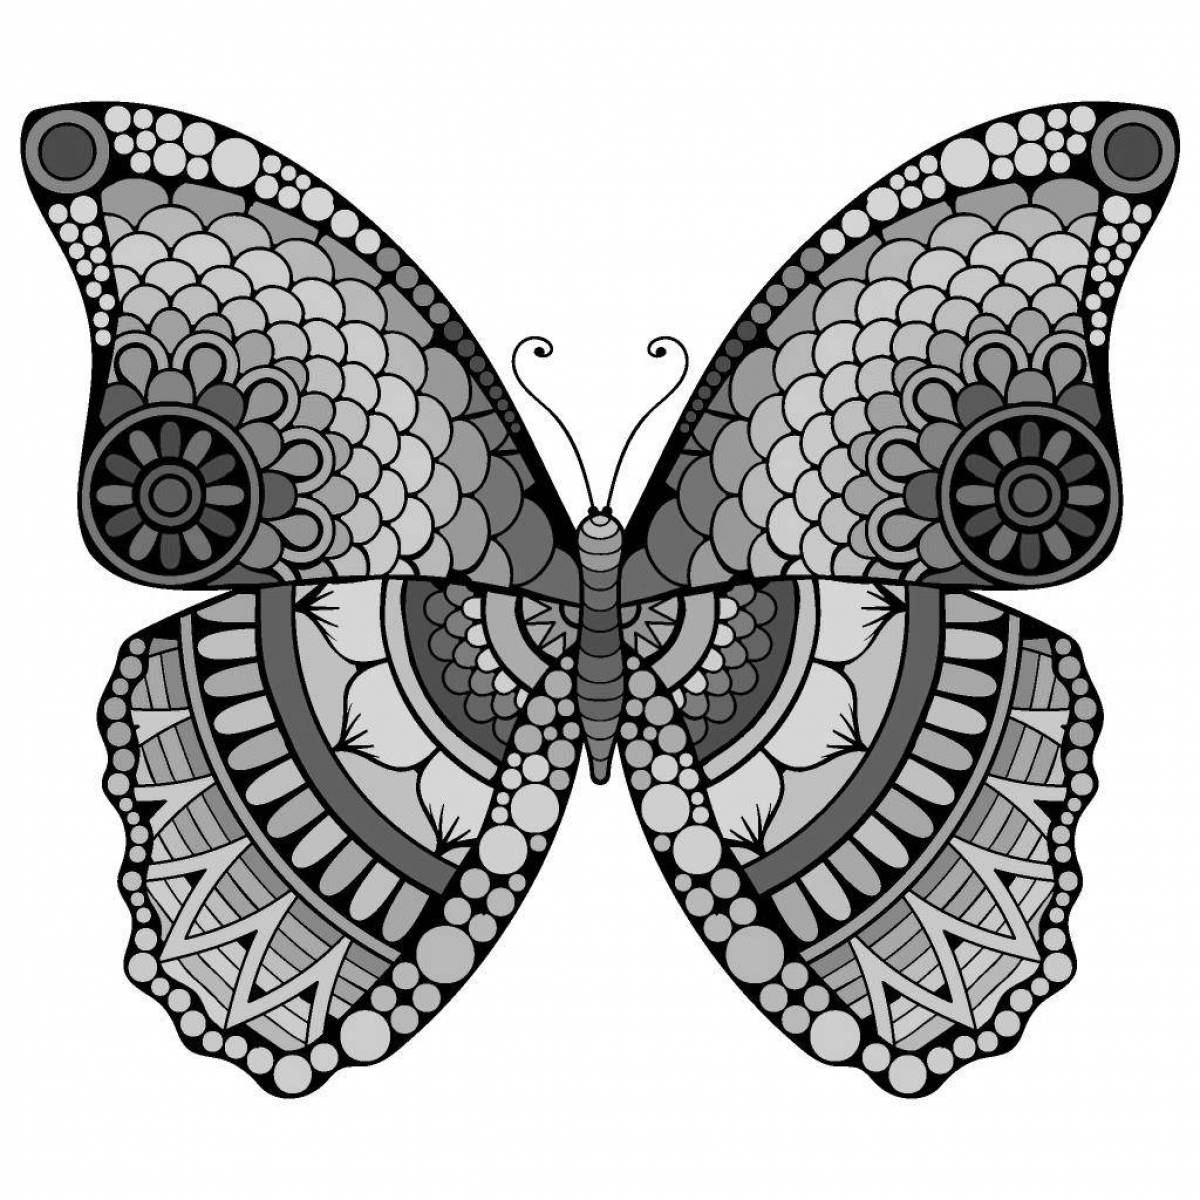 Luminous butterfly coloring book